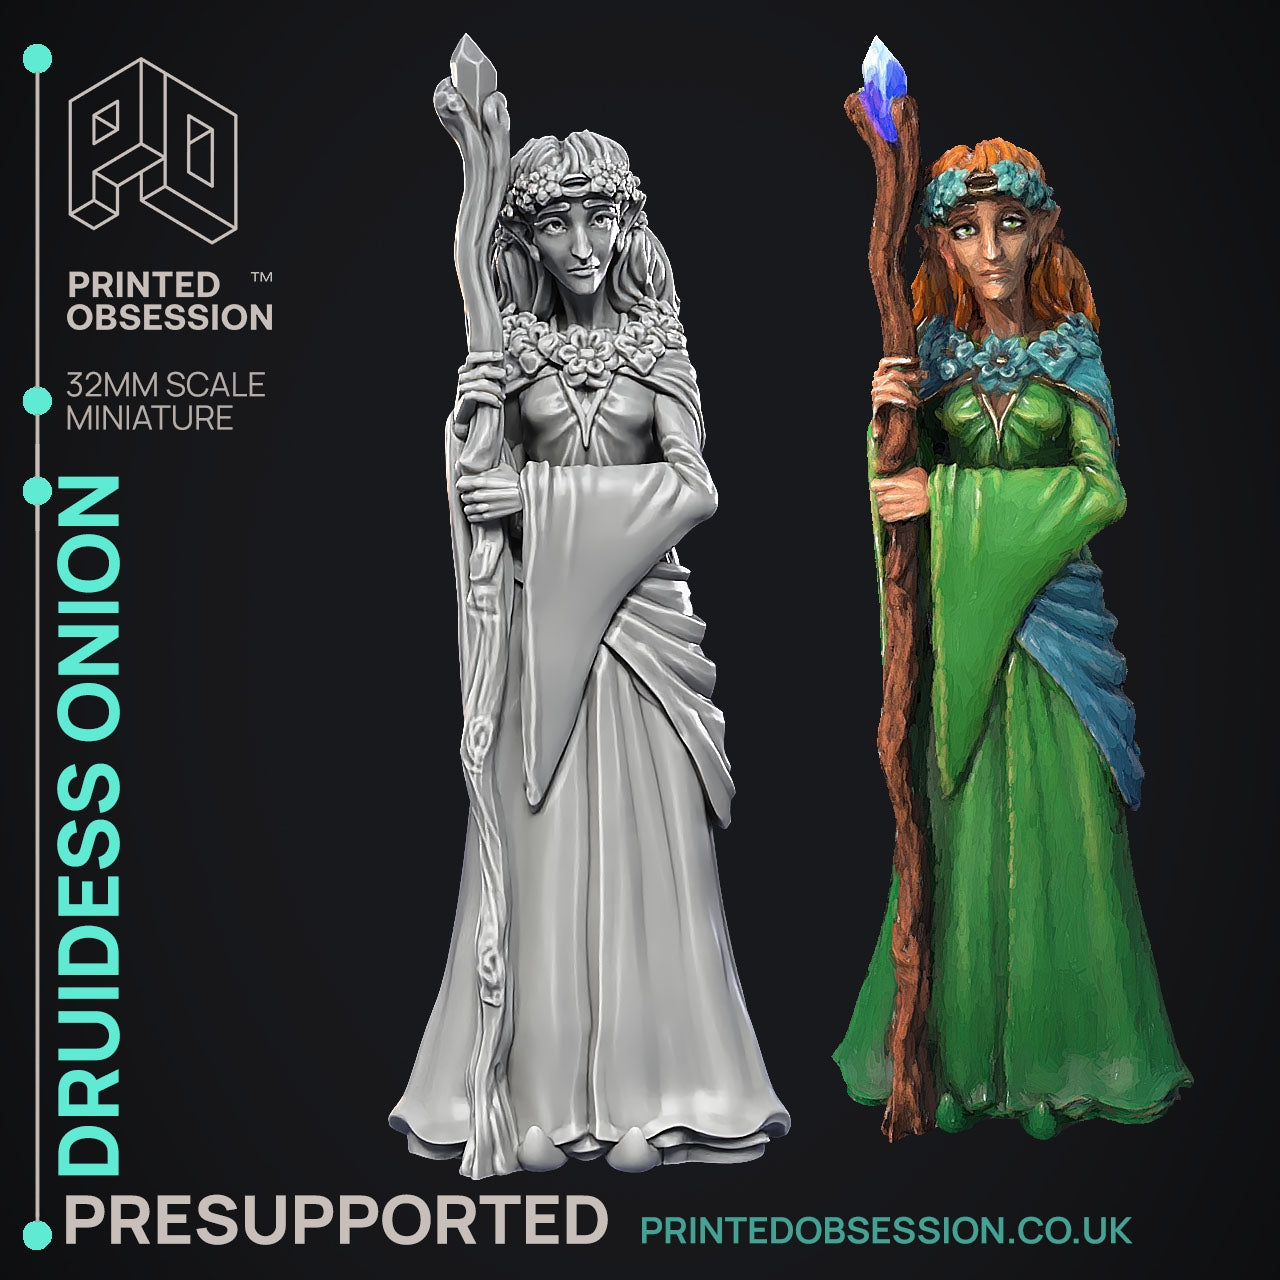 Druidess Onion - The Discus World - The Printed Obsession - Table-top mini, 3D Printed Collectable for painting and playing!